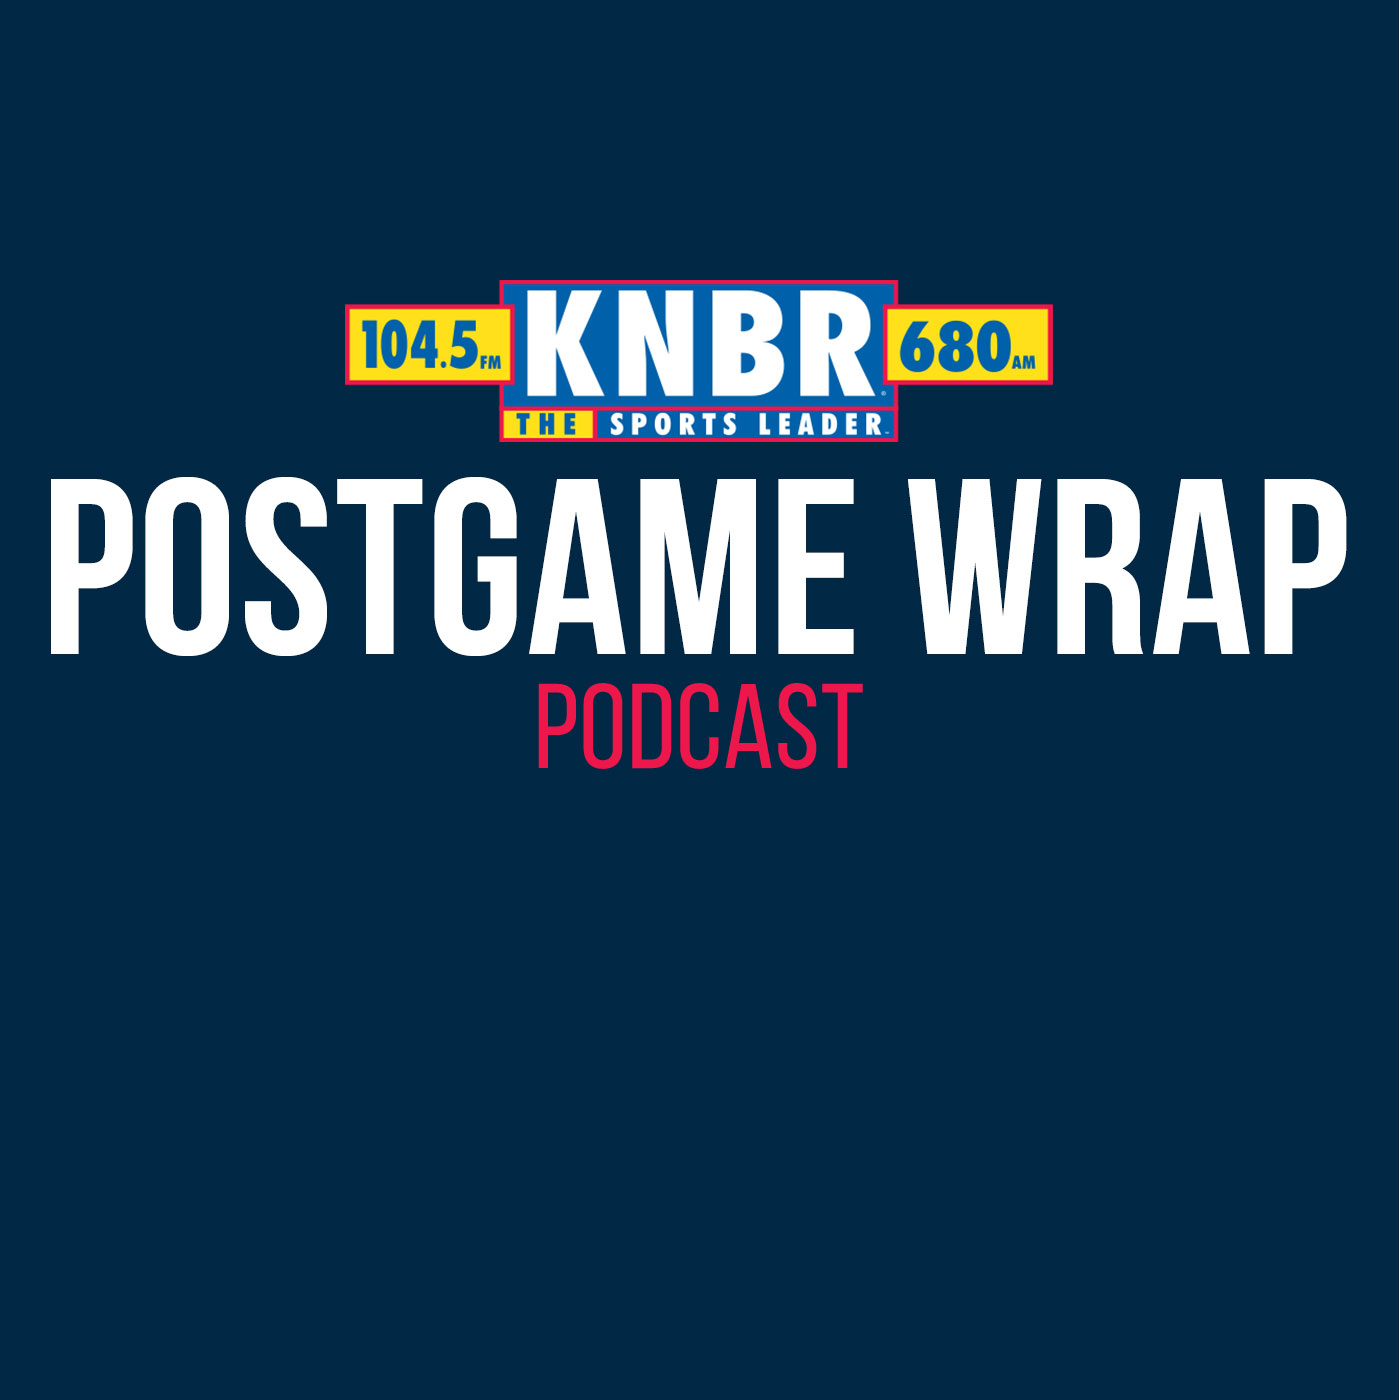 7-20 Postgame Wrap: Reds 5, Giants 1